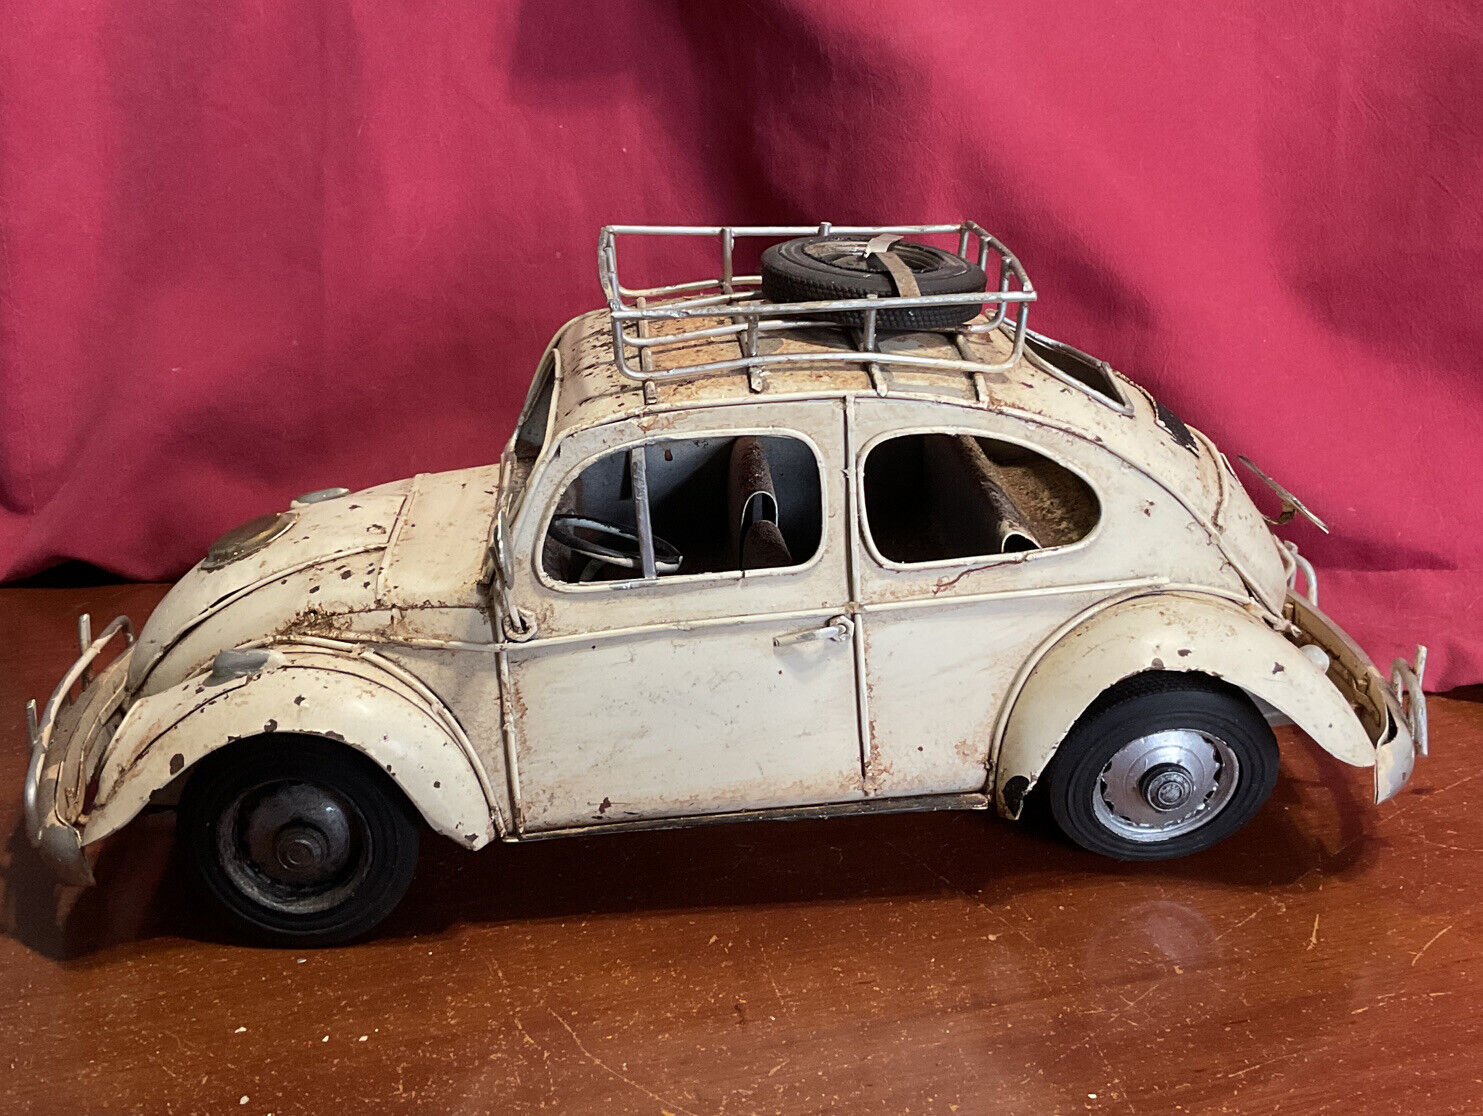 RETRO TIN VOLKSWAGEN BUG WITH ROOF RACK DISTRESS LOOK -HOME DECOR 13”L X6”W X5”H